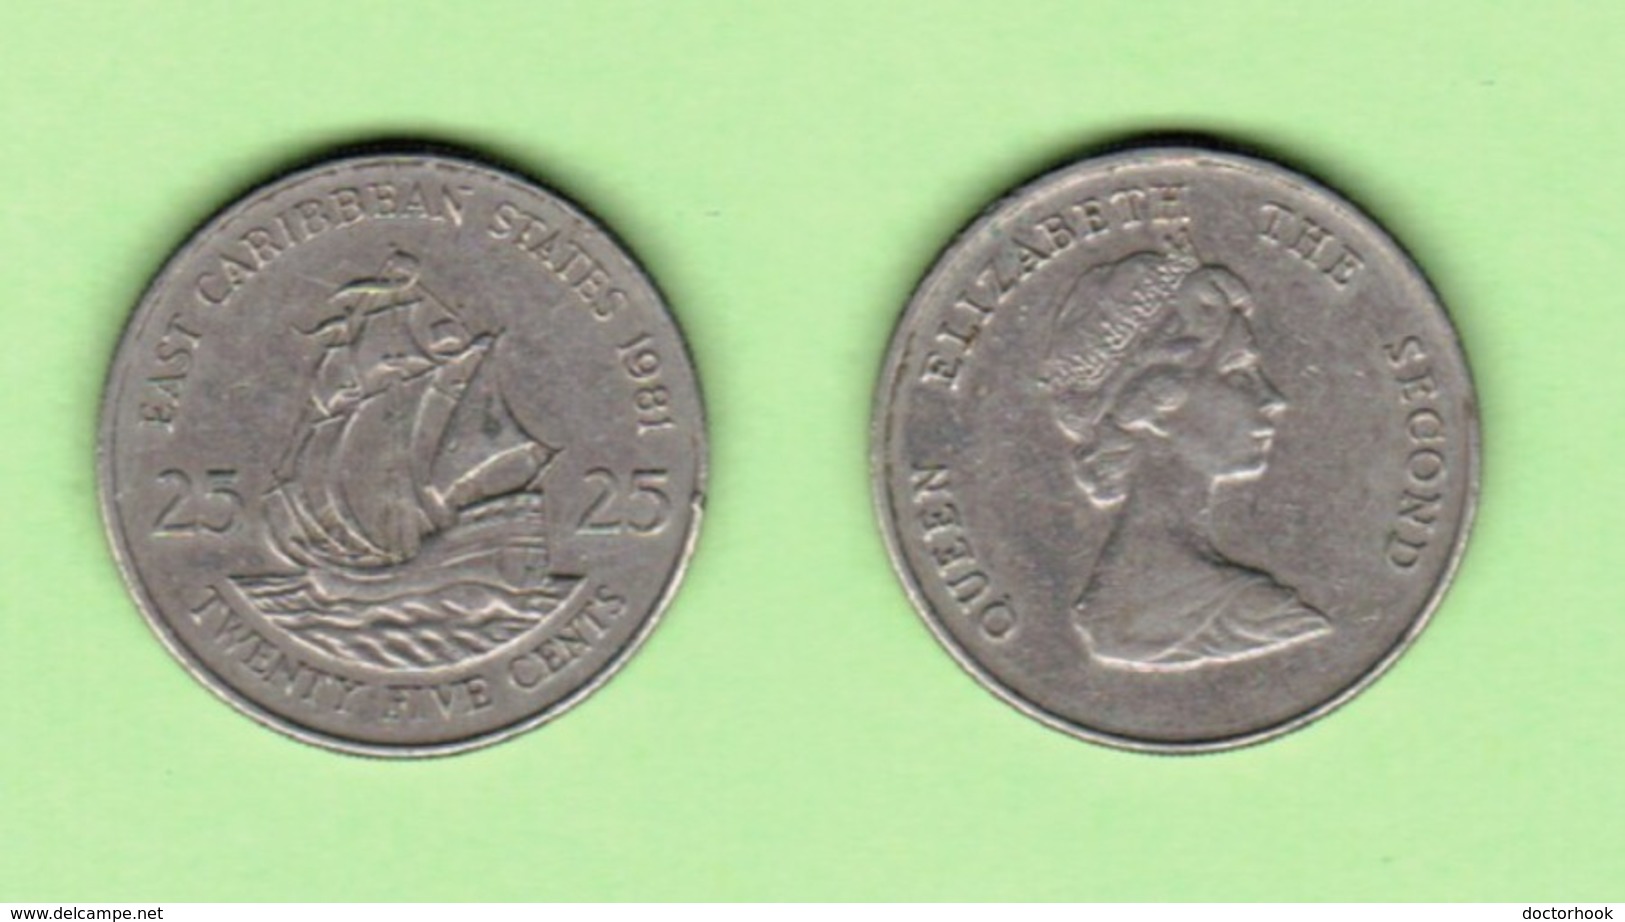 EAST CARIBBEAN STATES  25 CENTS 1981 (KM # 14) #6151 - East Caribbean States